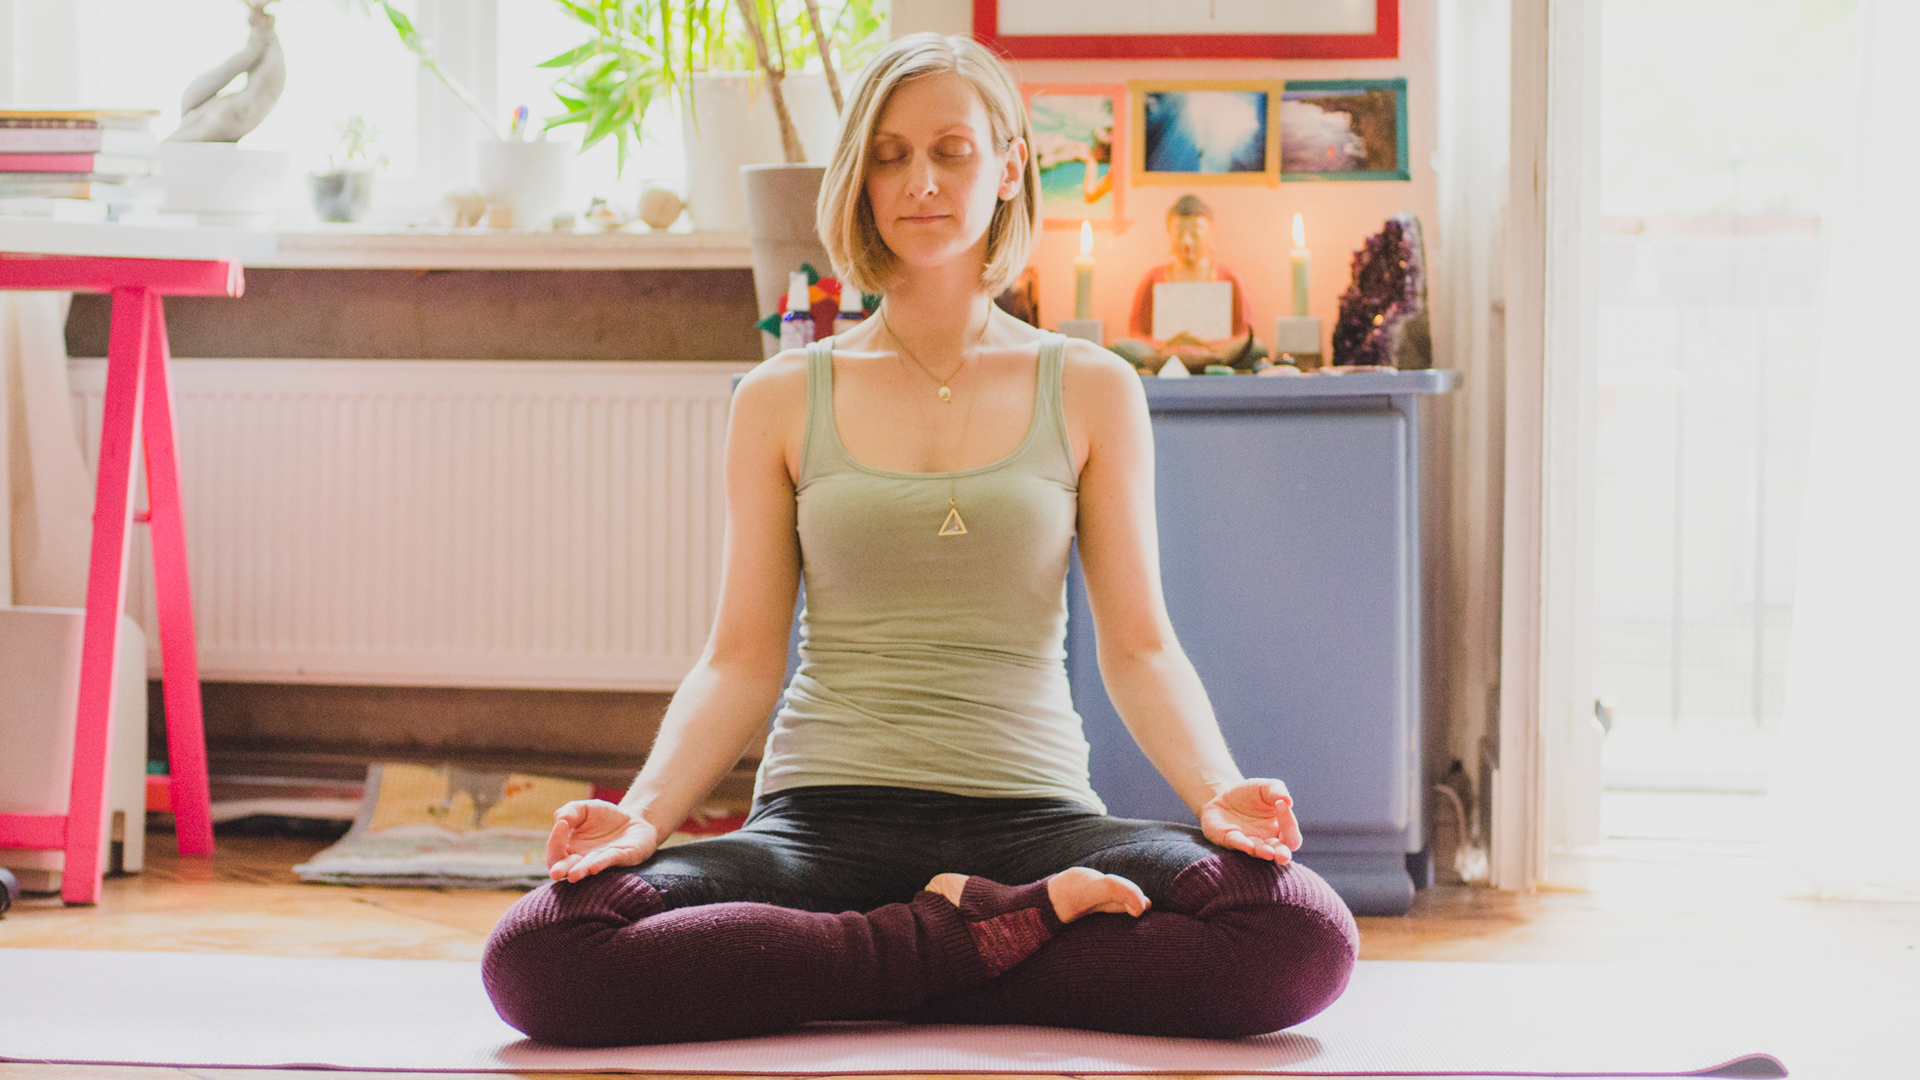 Yoga-Teacher-Isabella-Paulsen-talks-about-healing-leaky-gut-syndrome,-bone-broth-and-yoga.